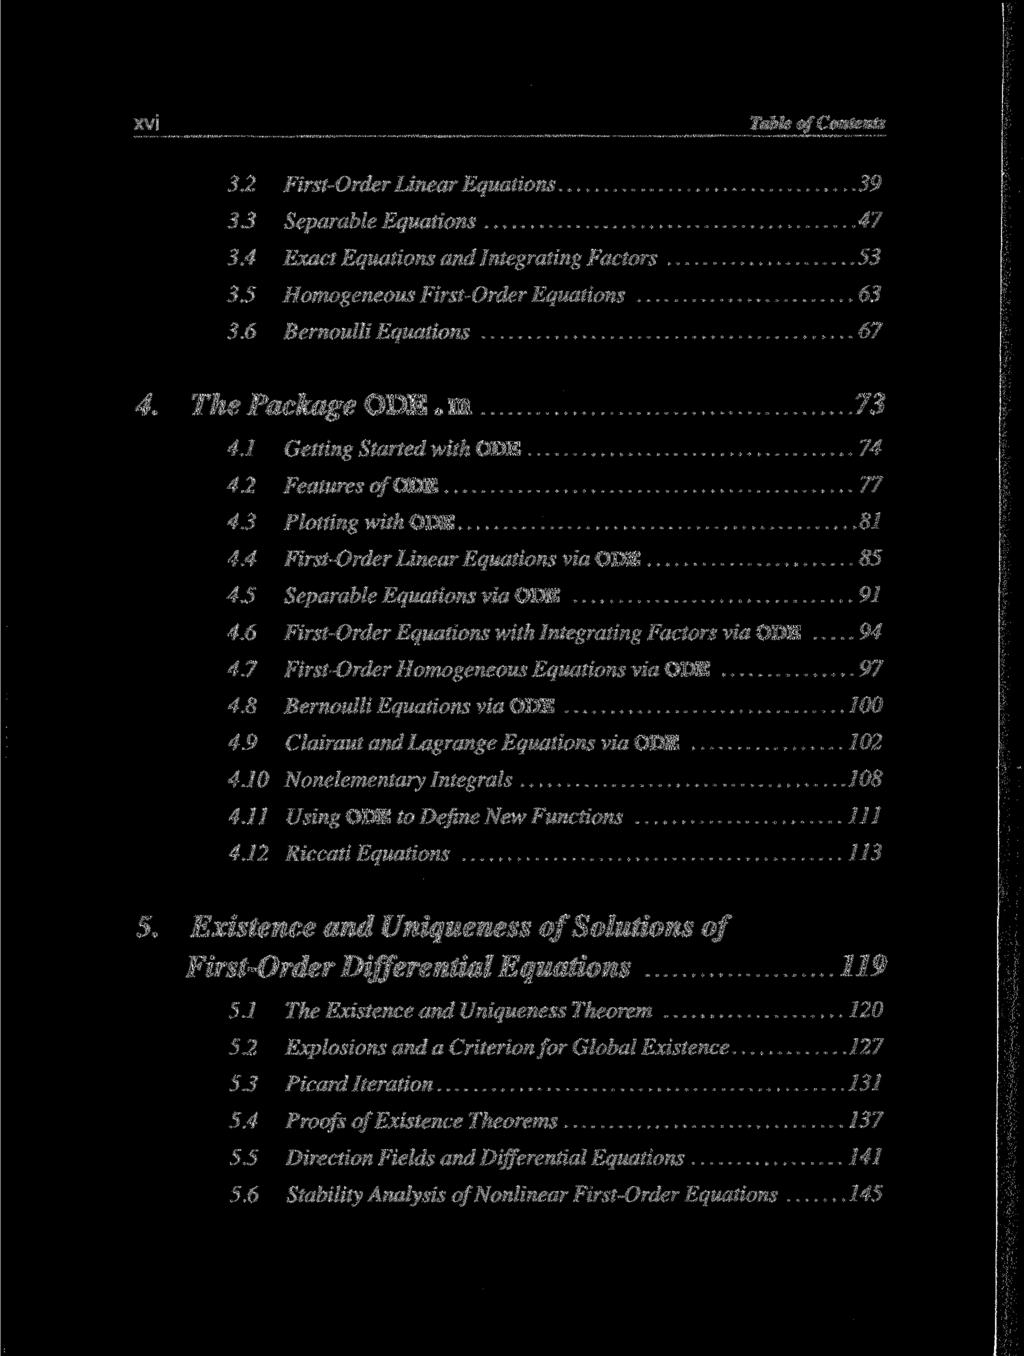 XVi Table of Contents 3.2 First-Order Linear Equations 39 3.3 Separable Equations 47 3.4 Exact Equations and Integrating Factors 53 3.5 Homogeneous First-Order Equations 63 3.